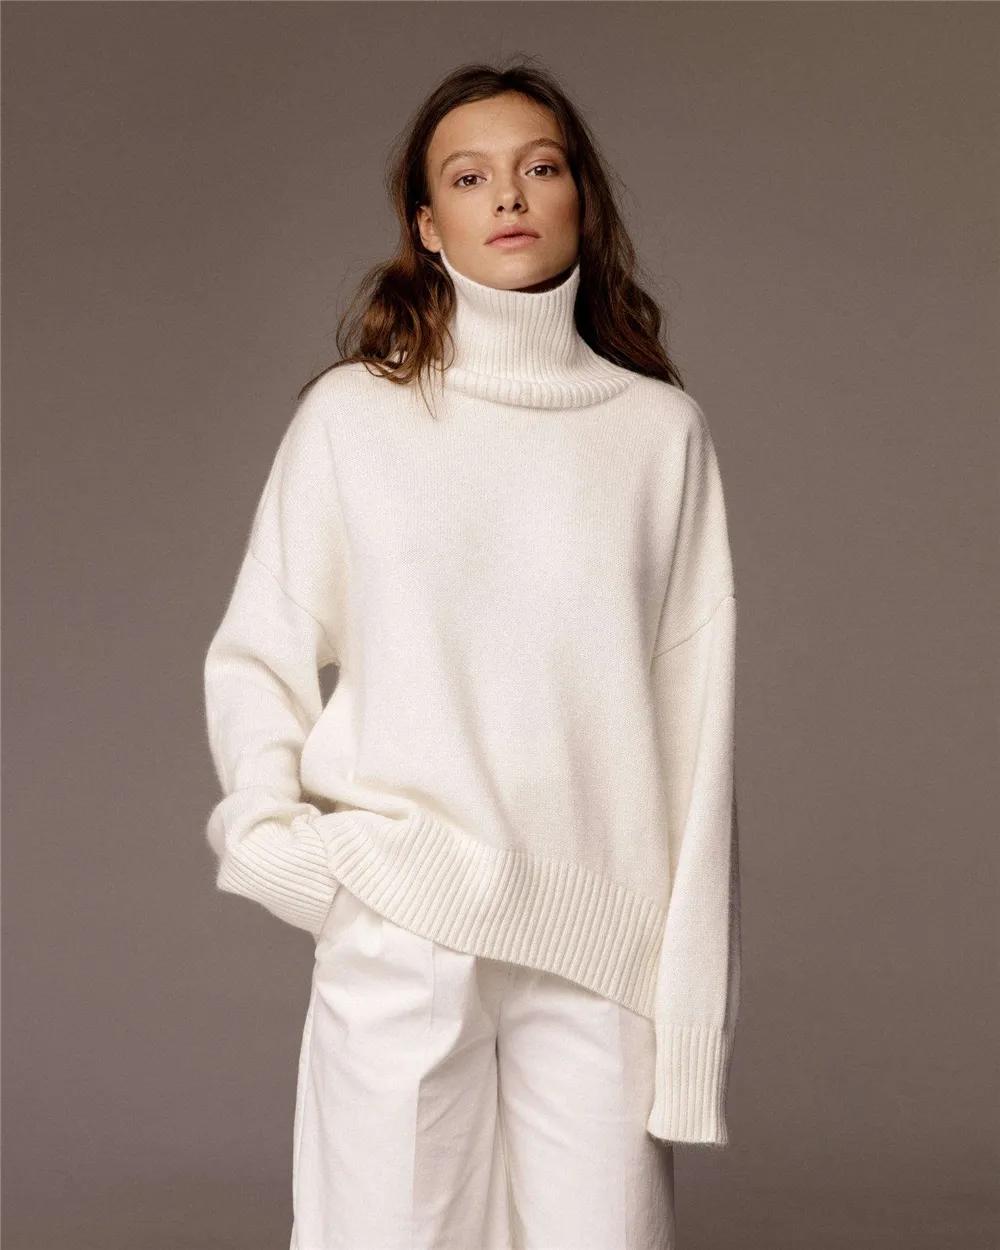 100% Cashmere Women's Turtleneck Top Sweater Pullover Winter Knit Custom Turtle Neck Polyester Cotton Wool Cashmere Sweater